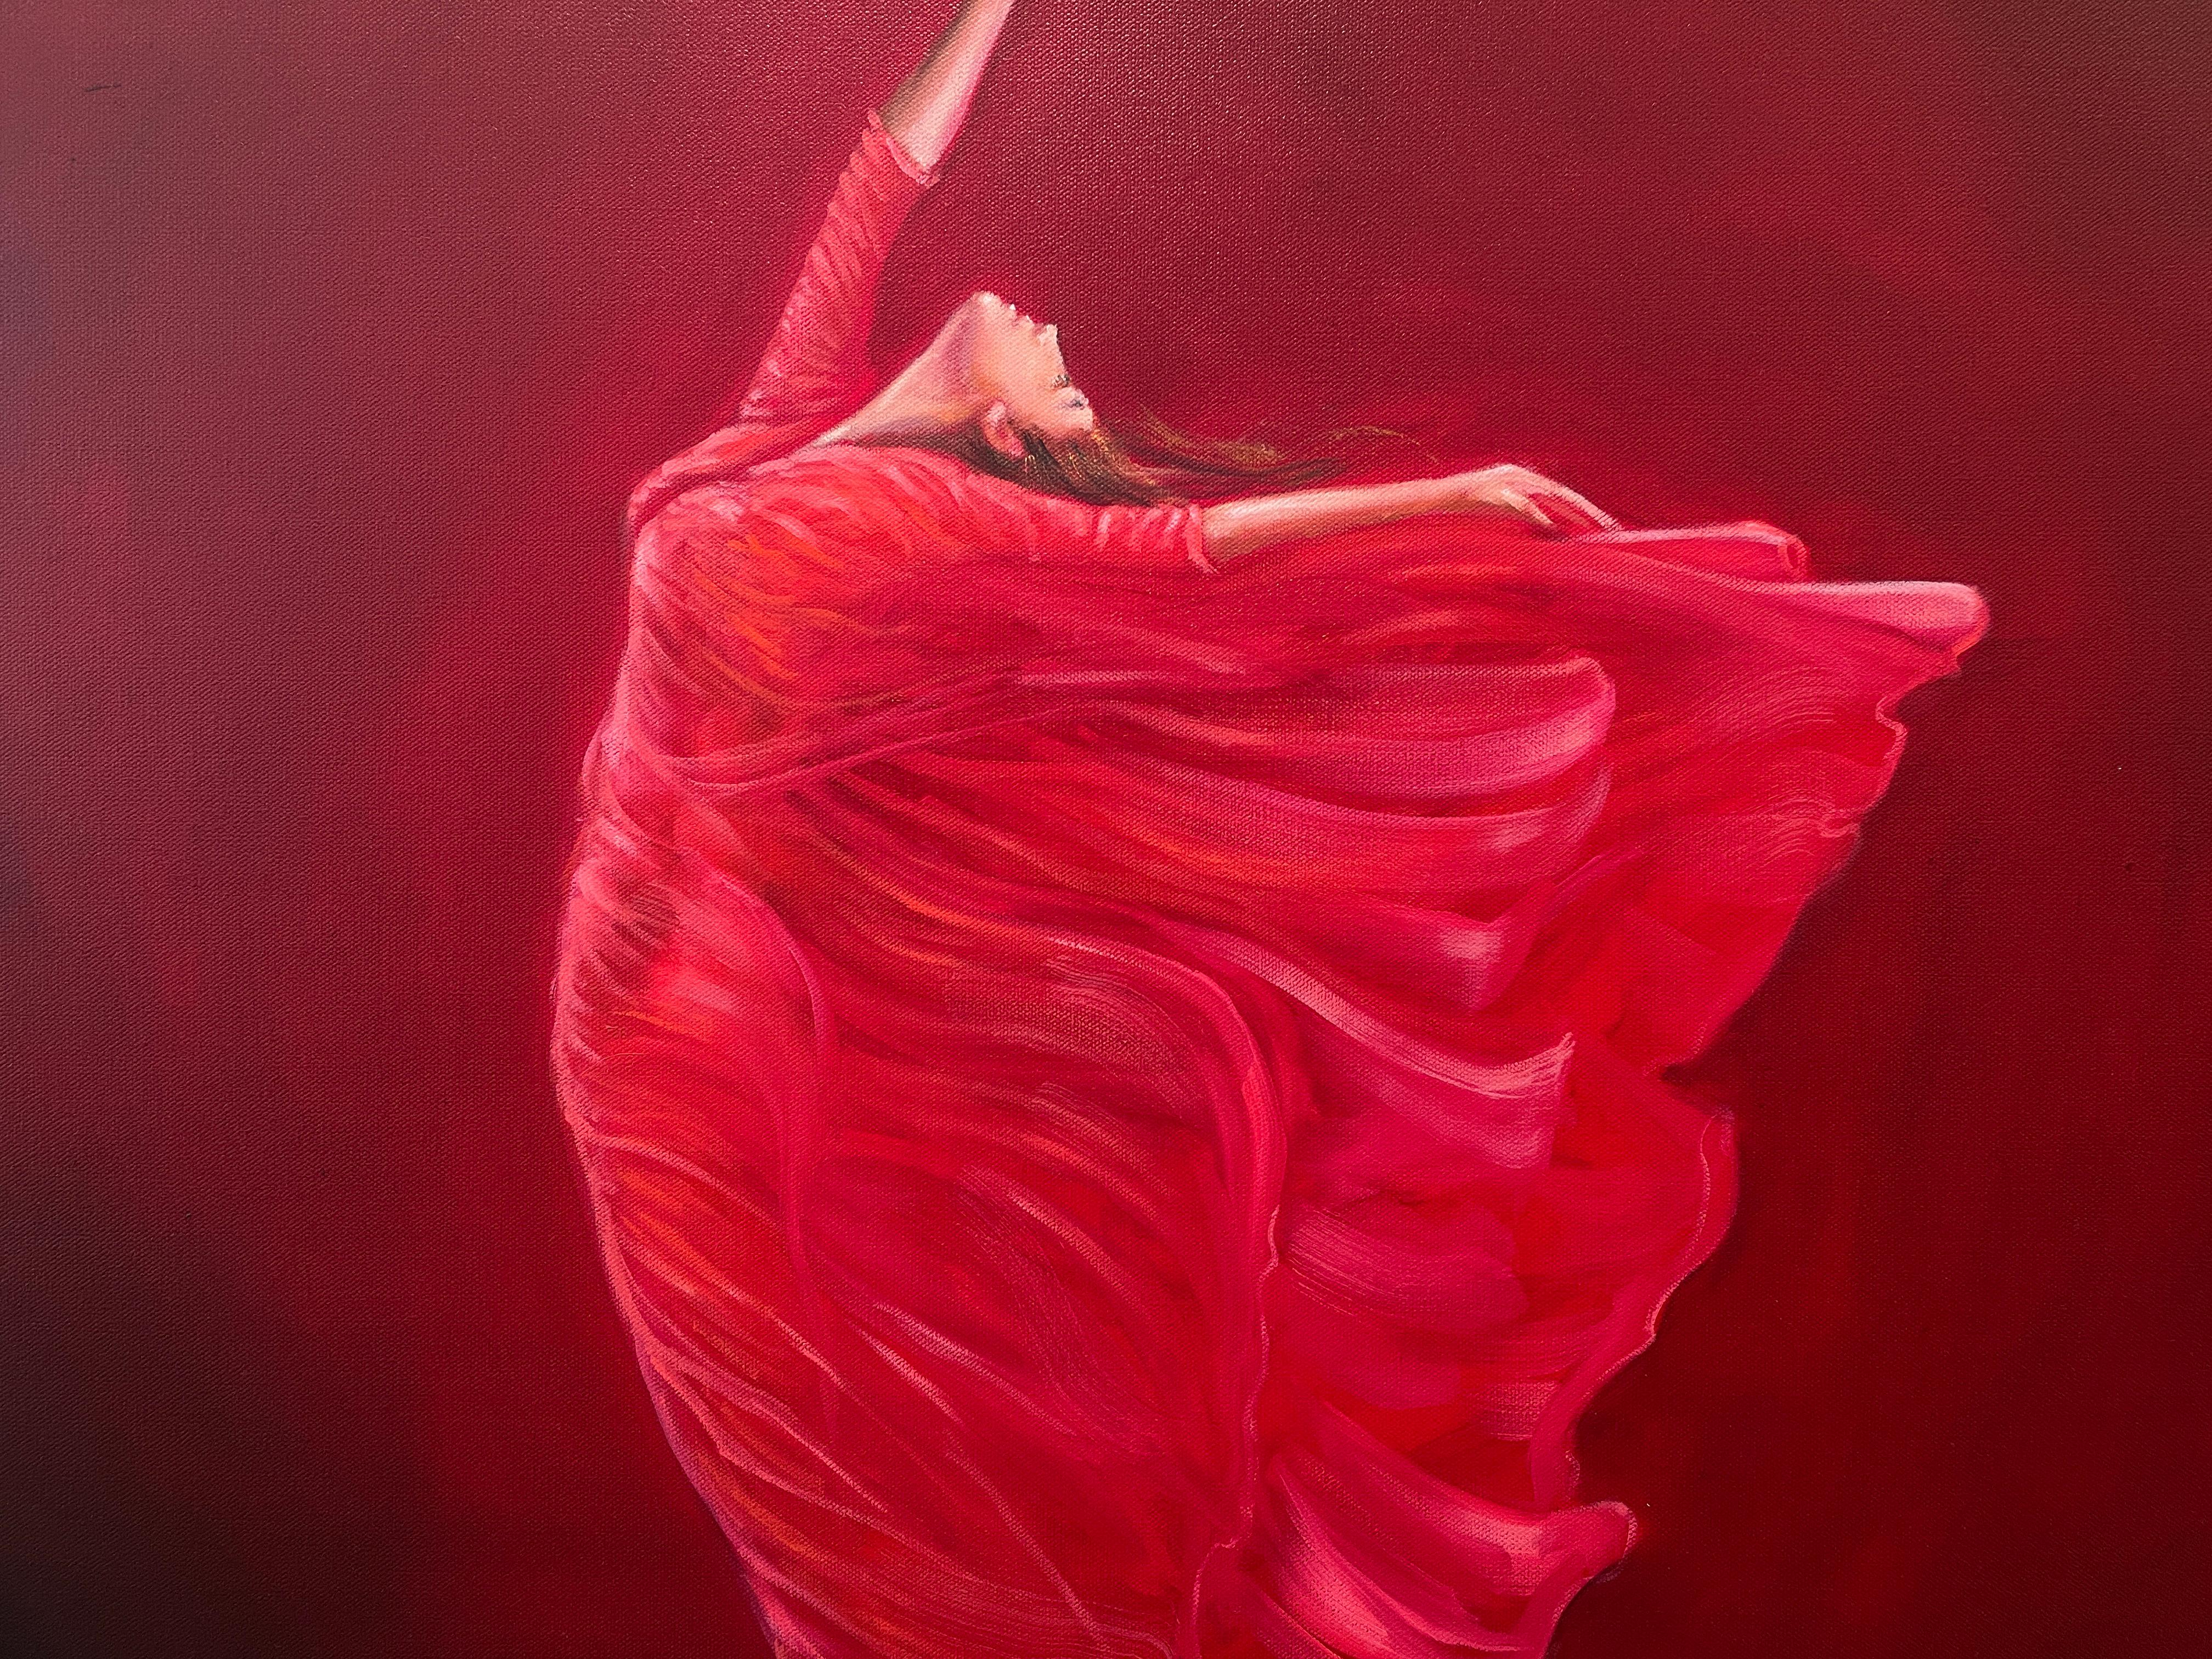 'Passione' - Ballerina in Red - The Ballet Series - Figurative Oil Painting For Sale 3